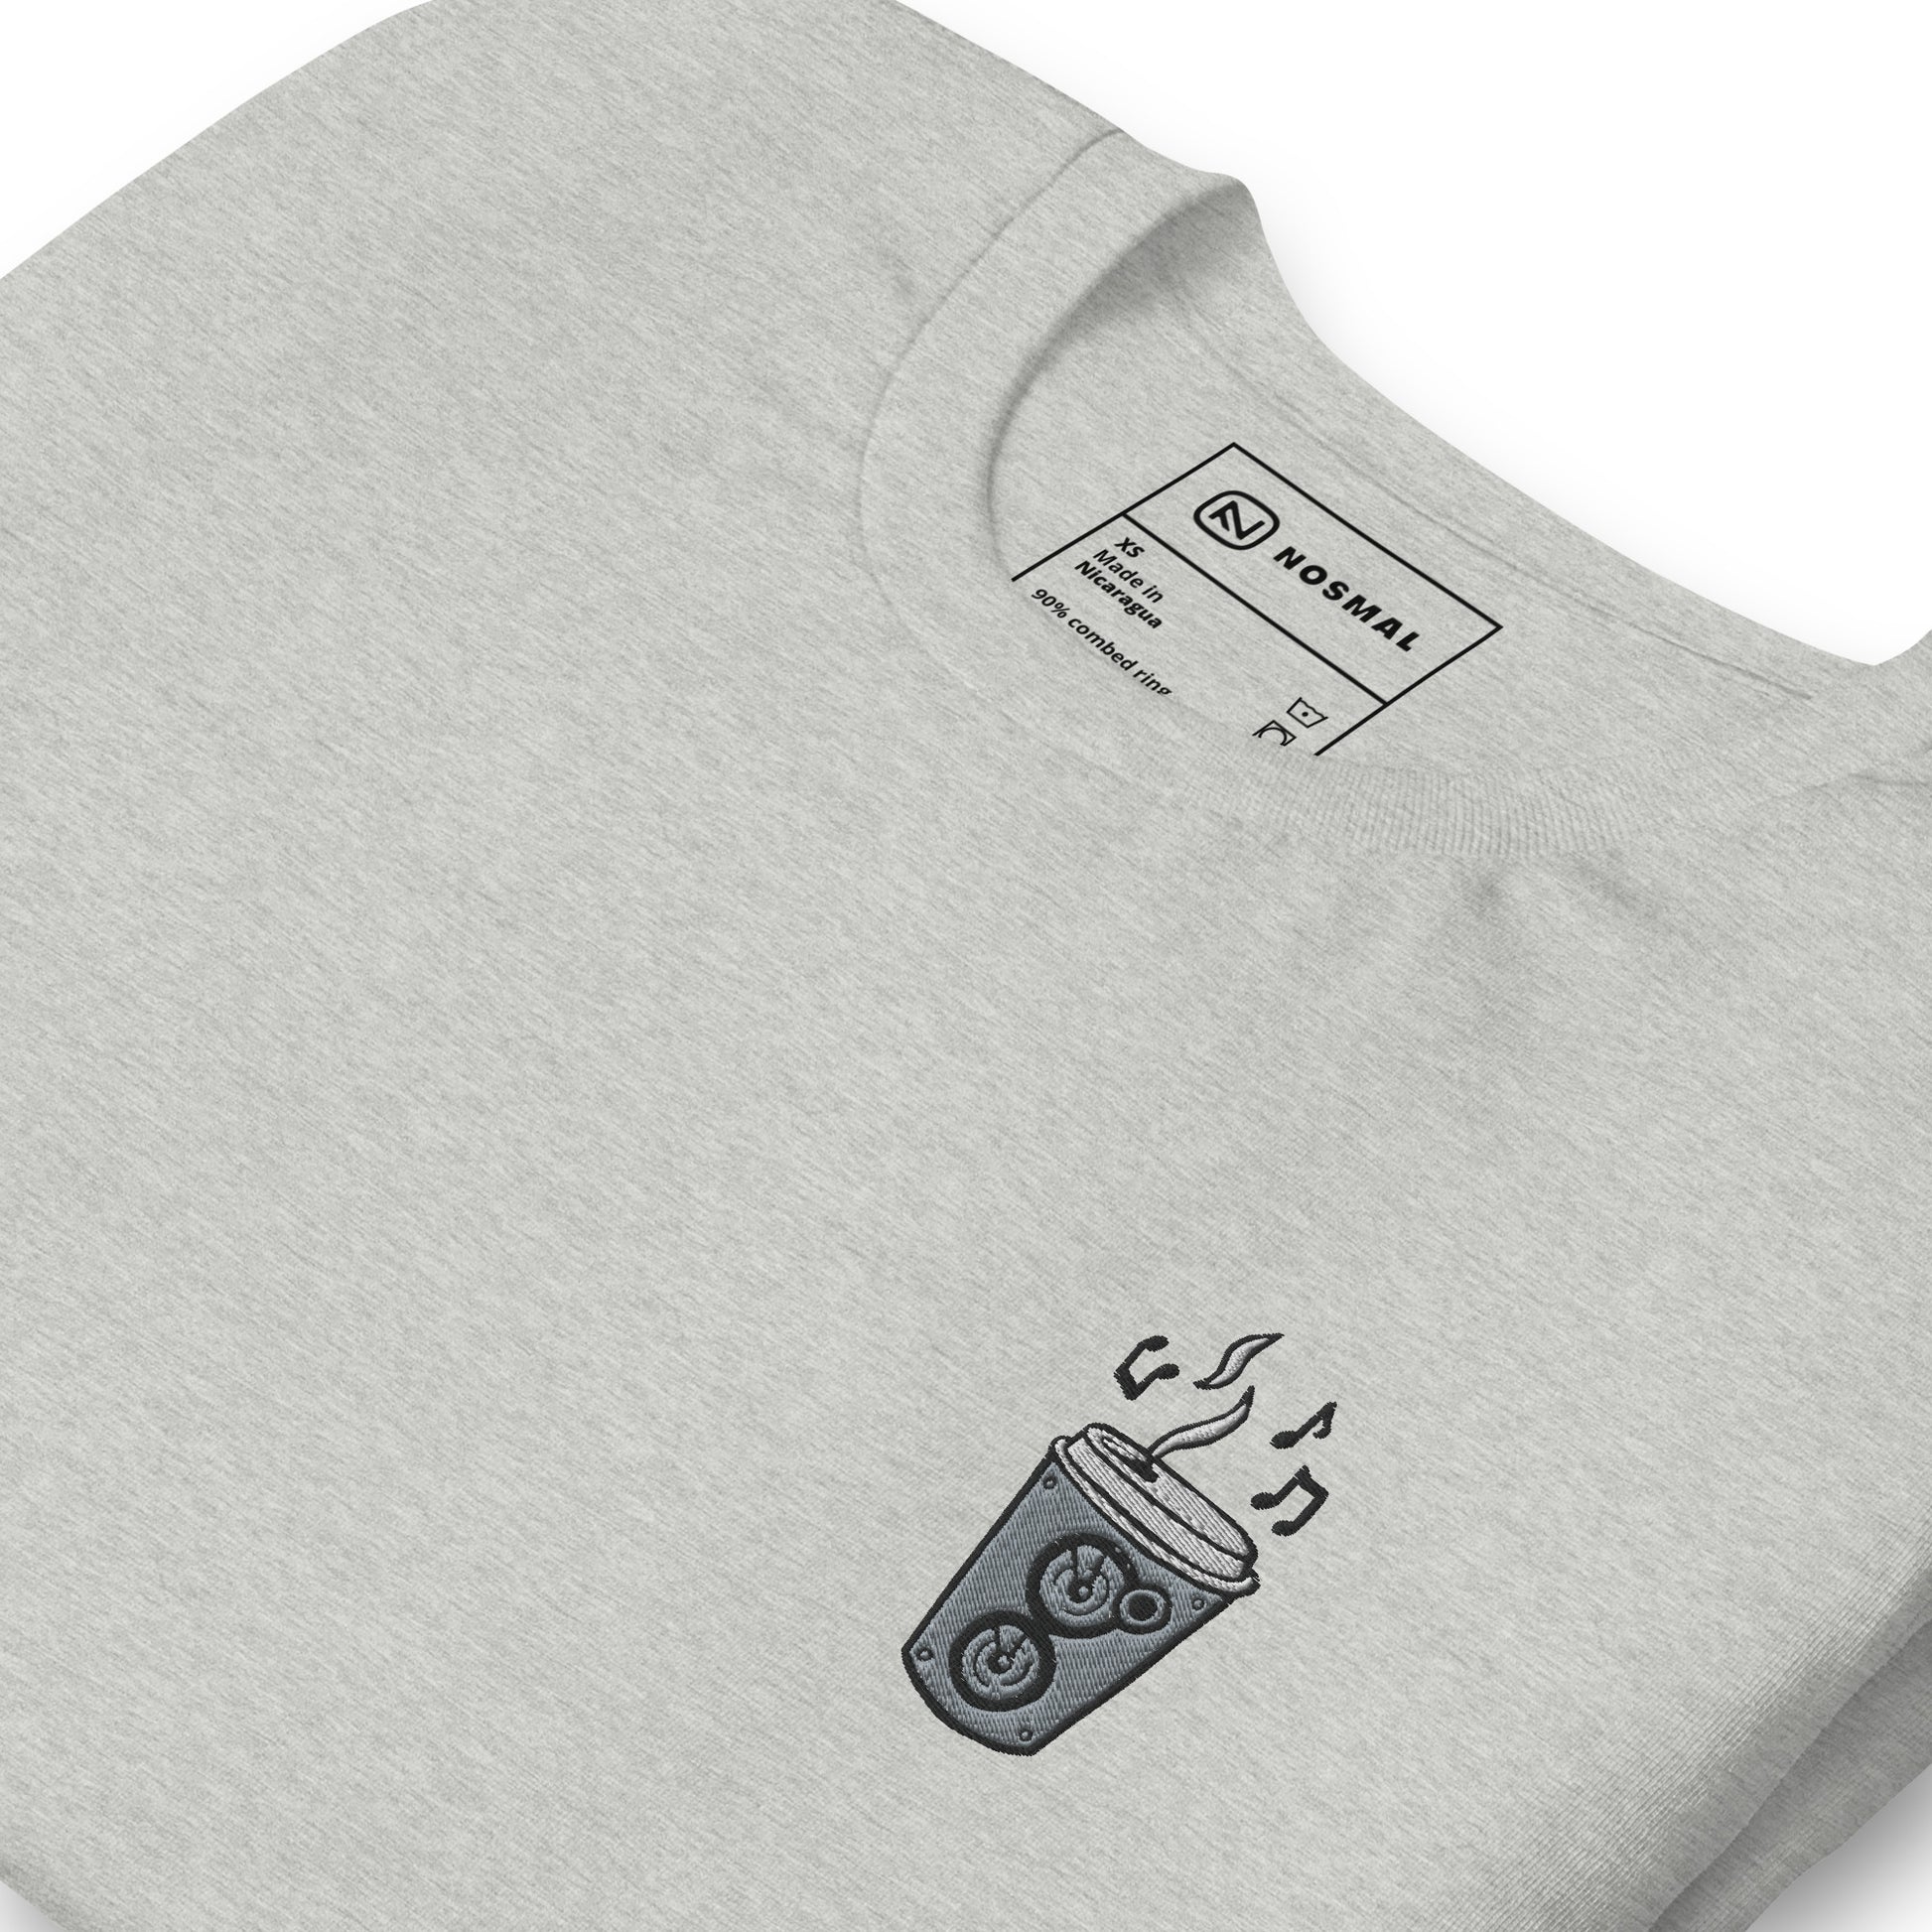 Angled close up shot of the coffee is my jam embroidered design on heather athletic grey unisex t-shirt.